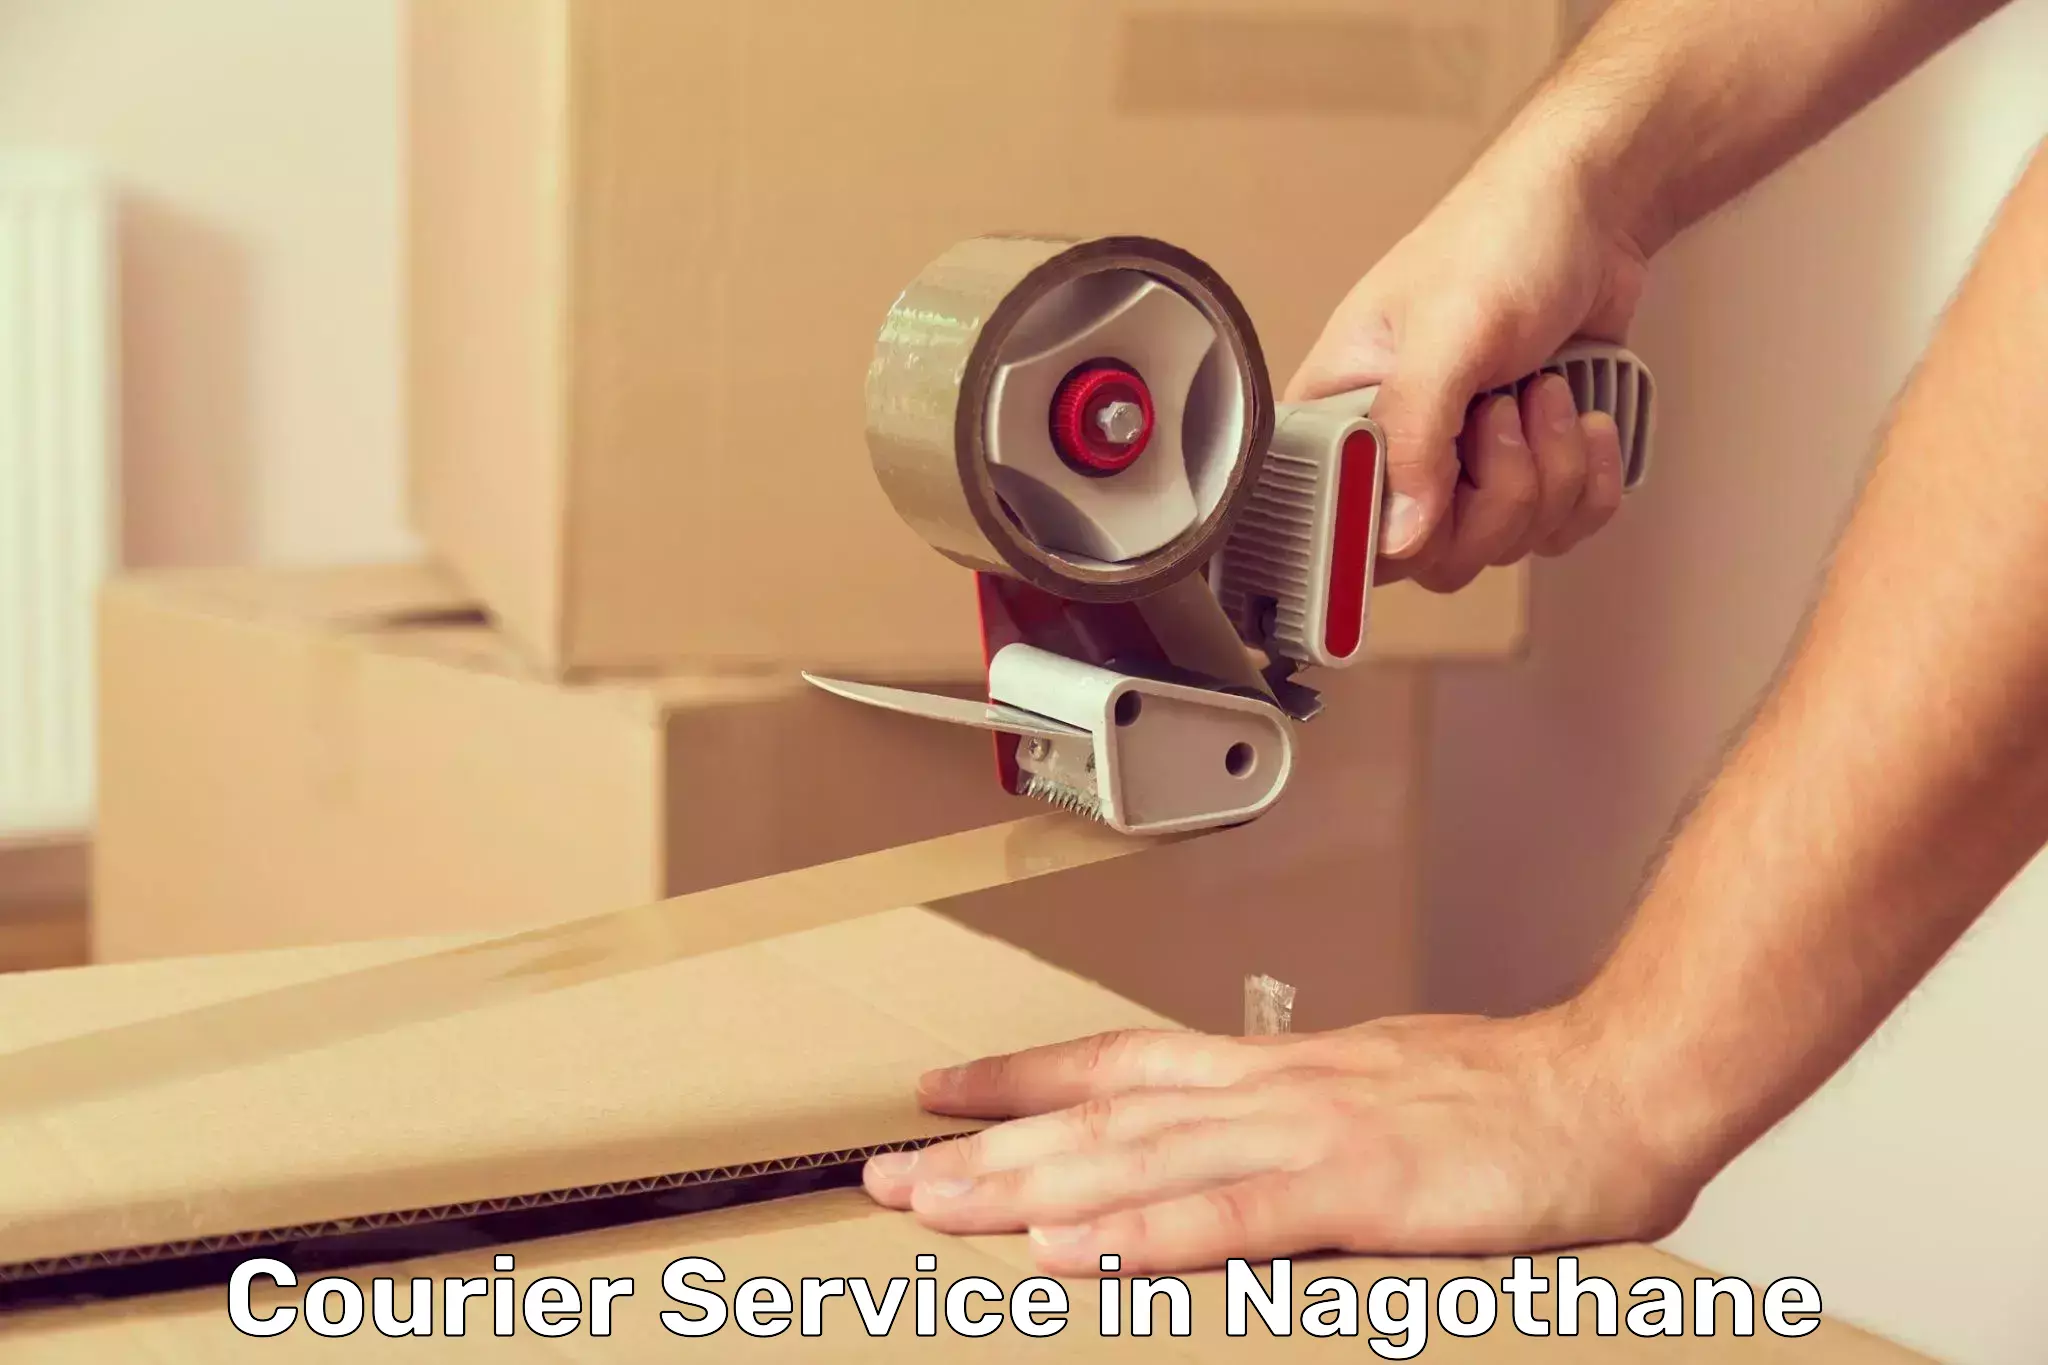 Bulk courier orders in Nagothane